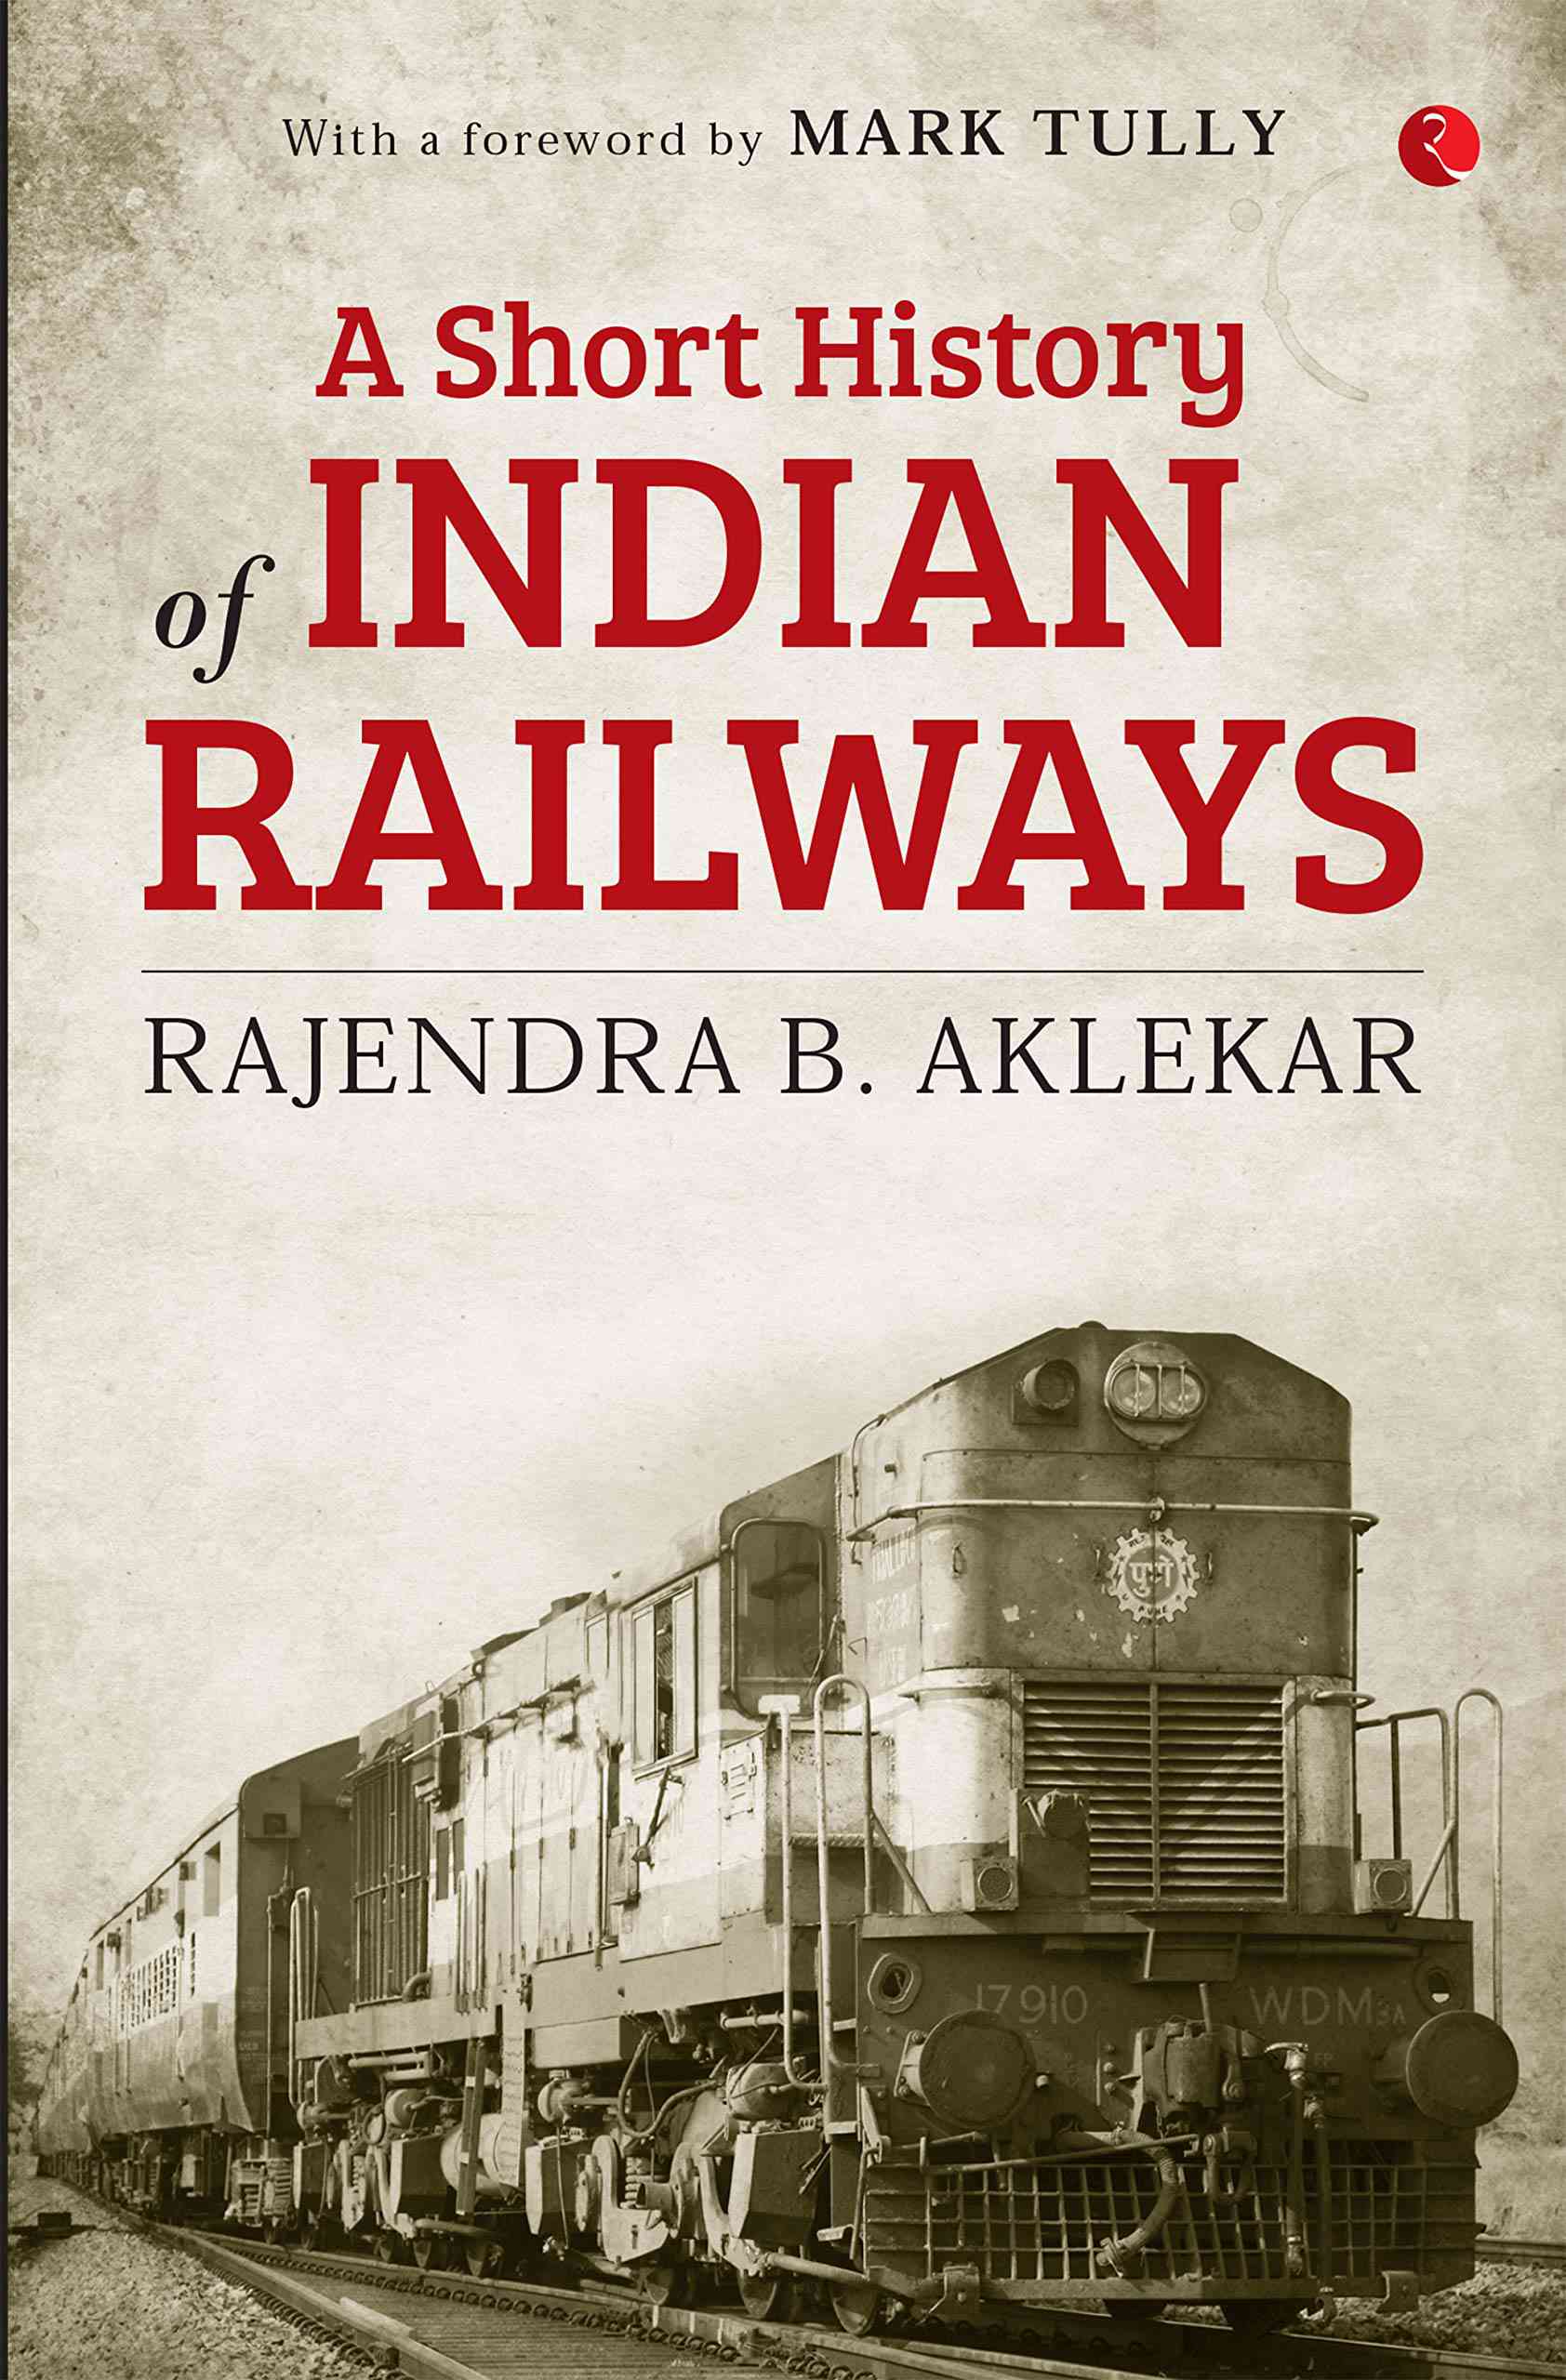 "A Short History of Indian Railways" title book penned by Rajendra B Aklekar_50.1